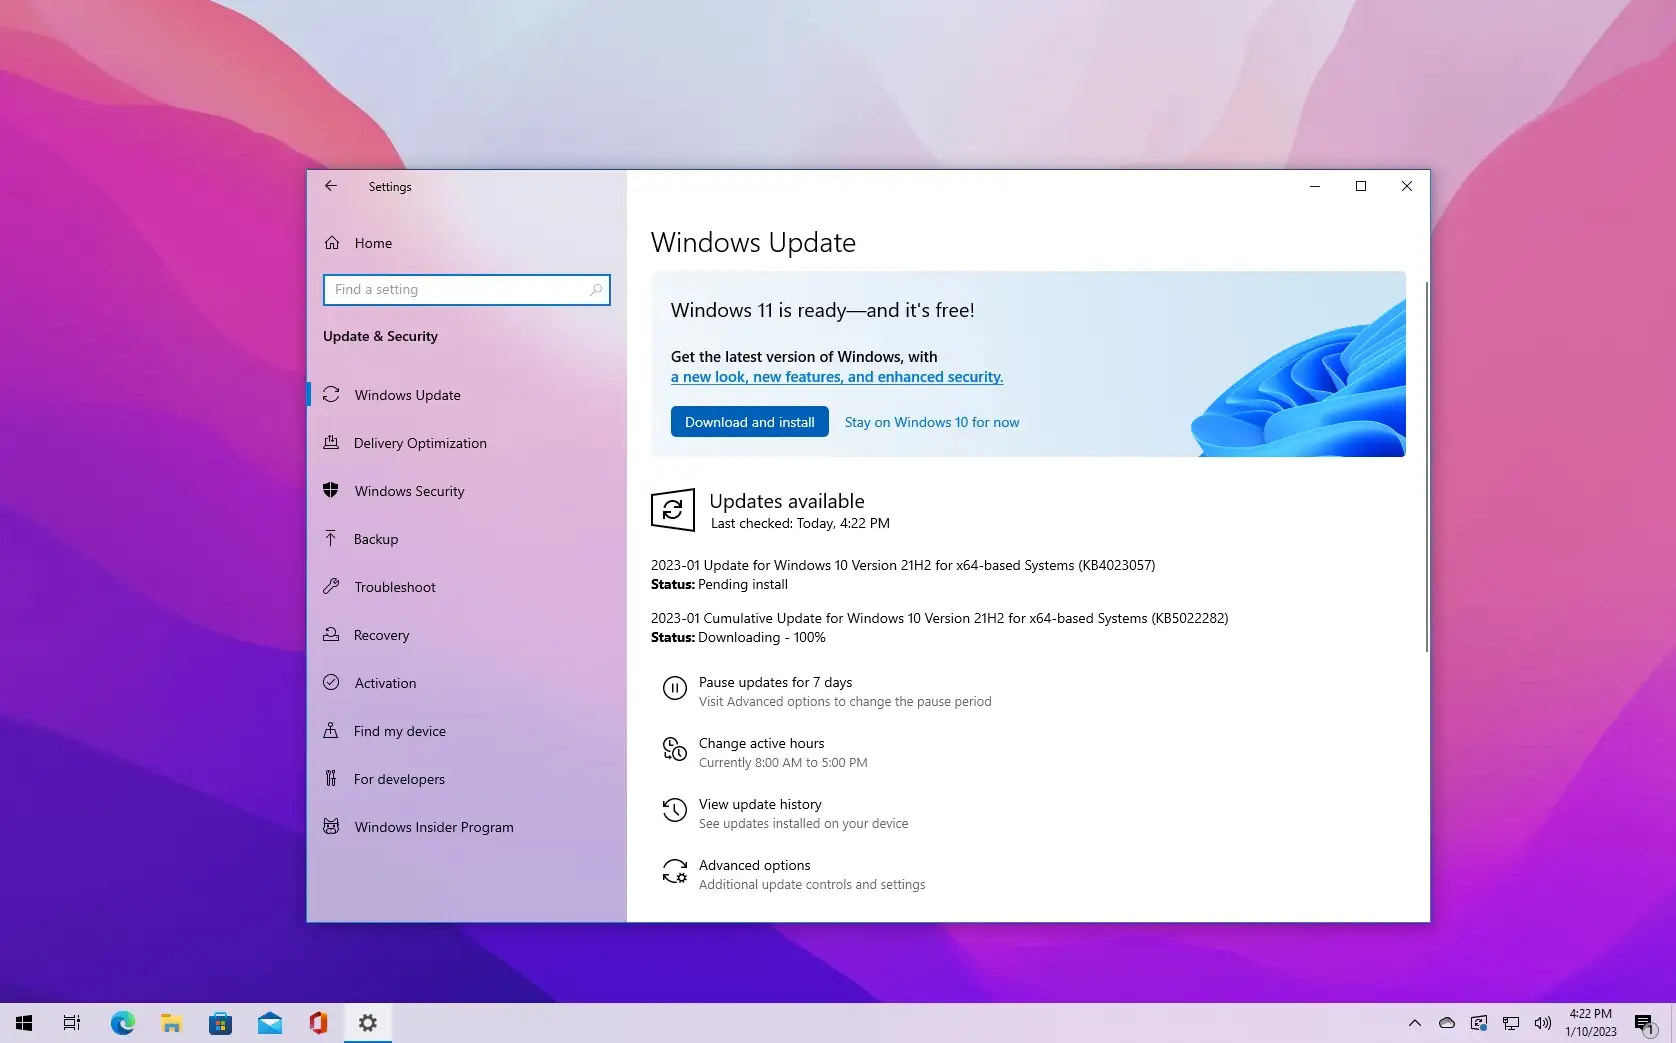 Microsoft blocks Windows 7/8 users from upgrading to Windows 11 for free